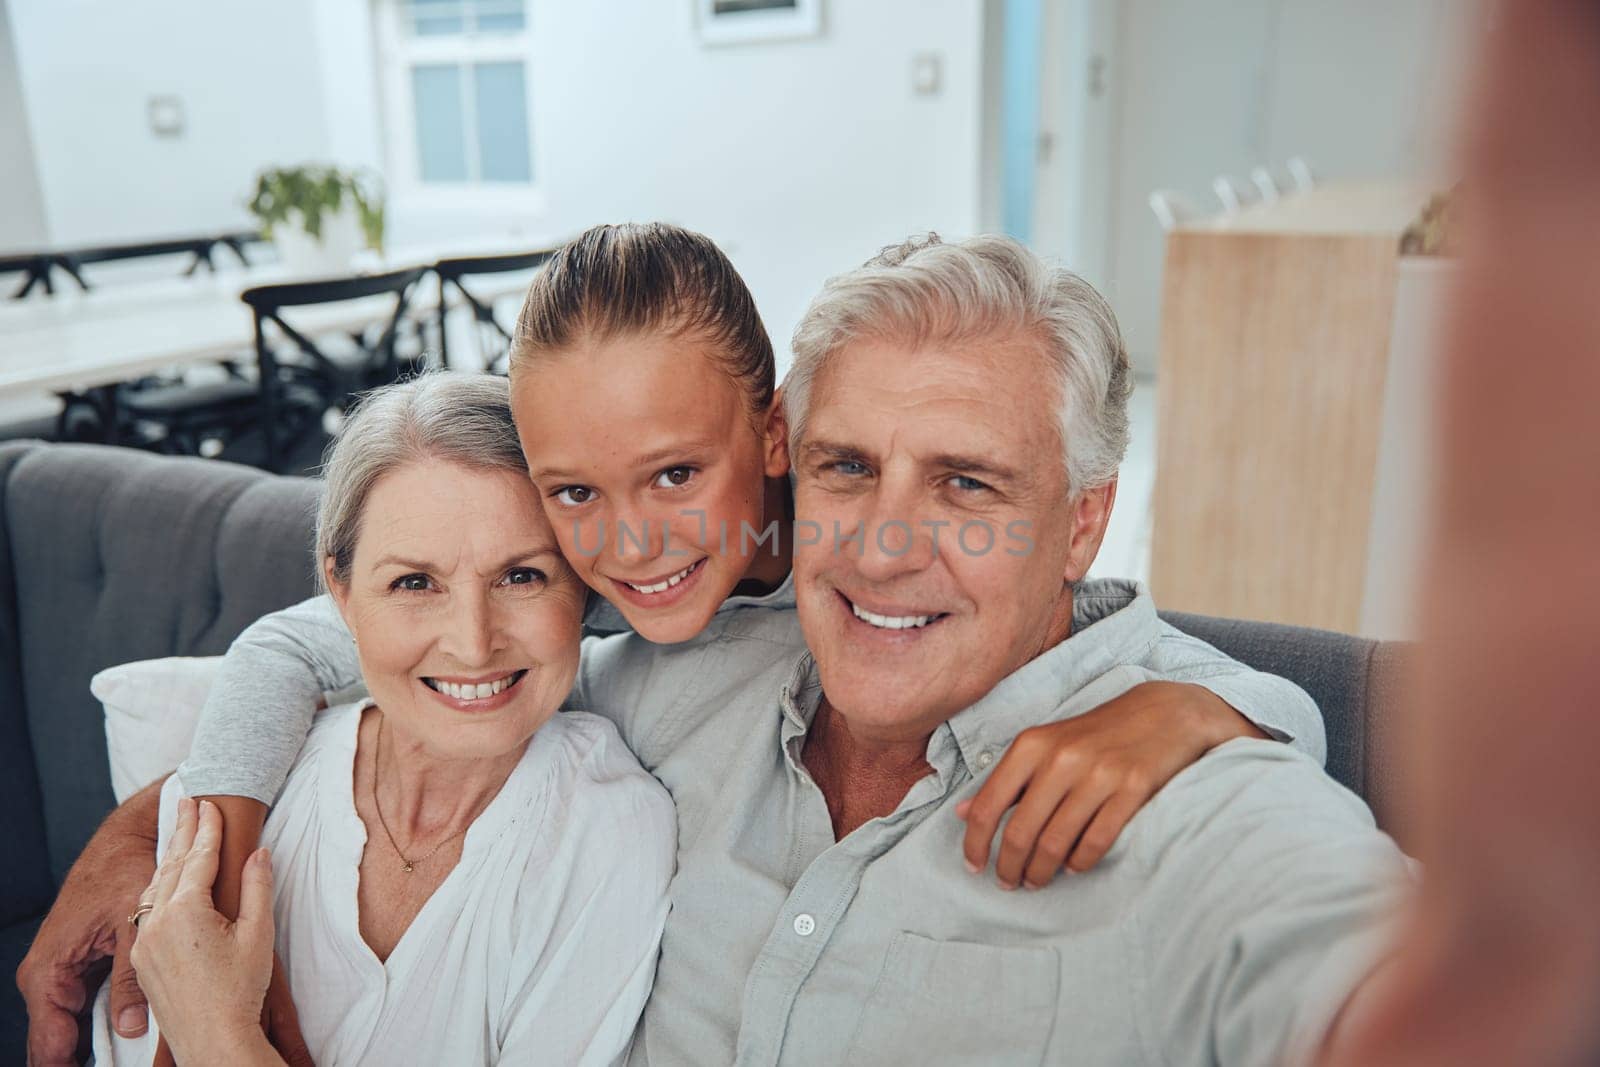 Family, love and selfie on sofa in home, having fun and bonding. Hug, portrait and grandpa, grandmother and girl taking pictures for profile picture, social media and happy memory together in house.